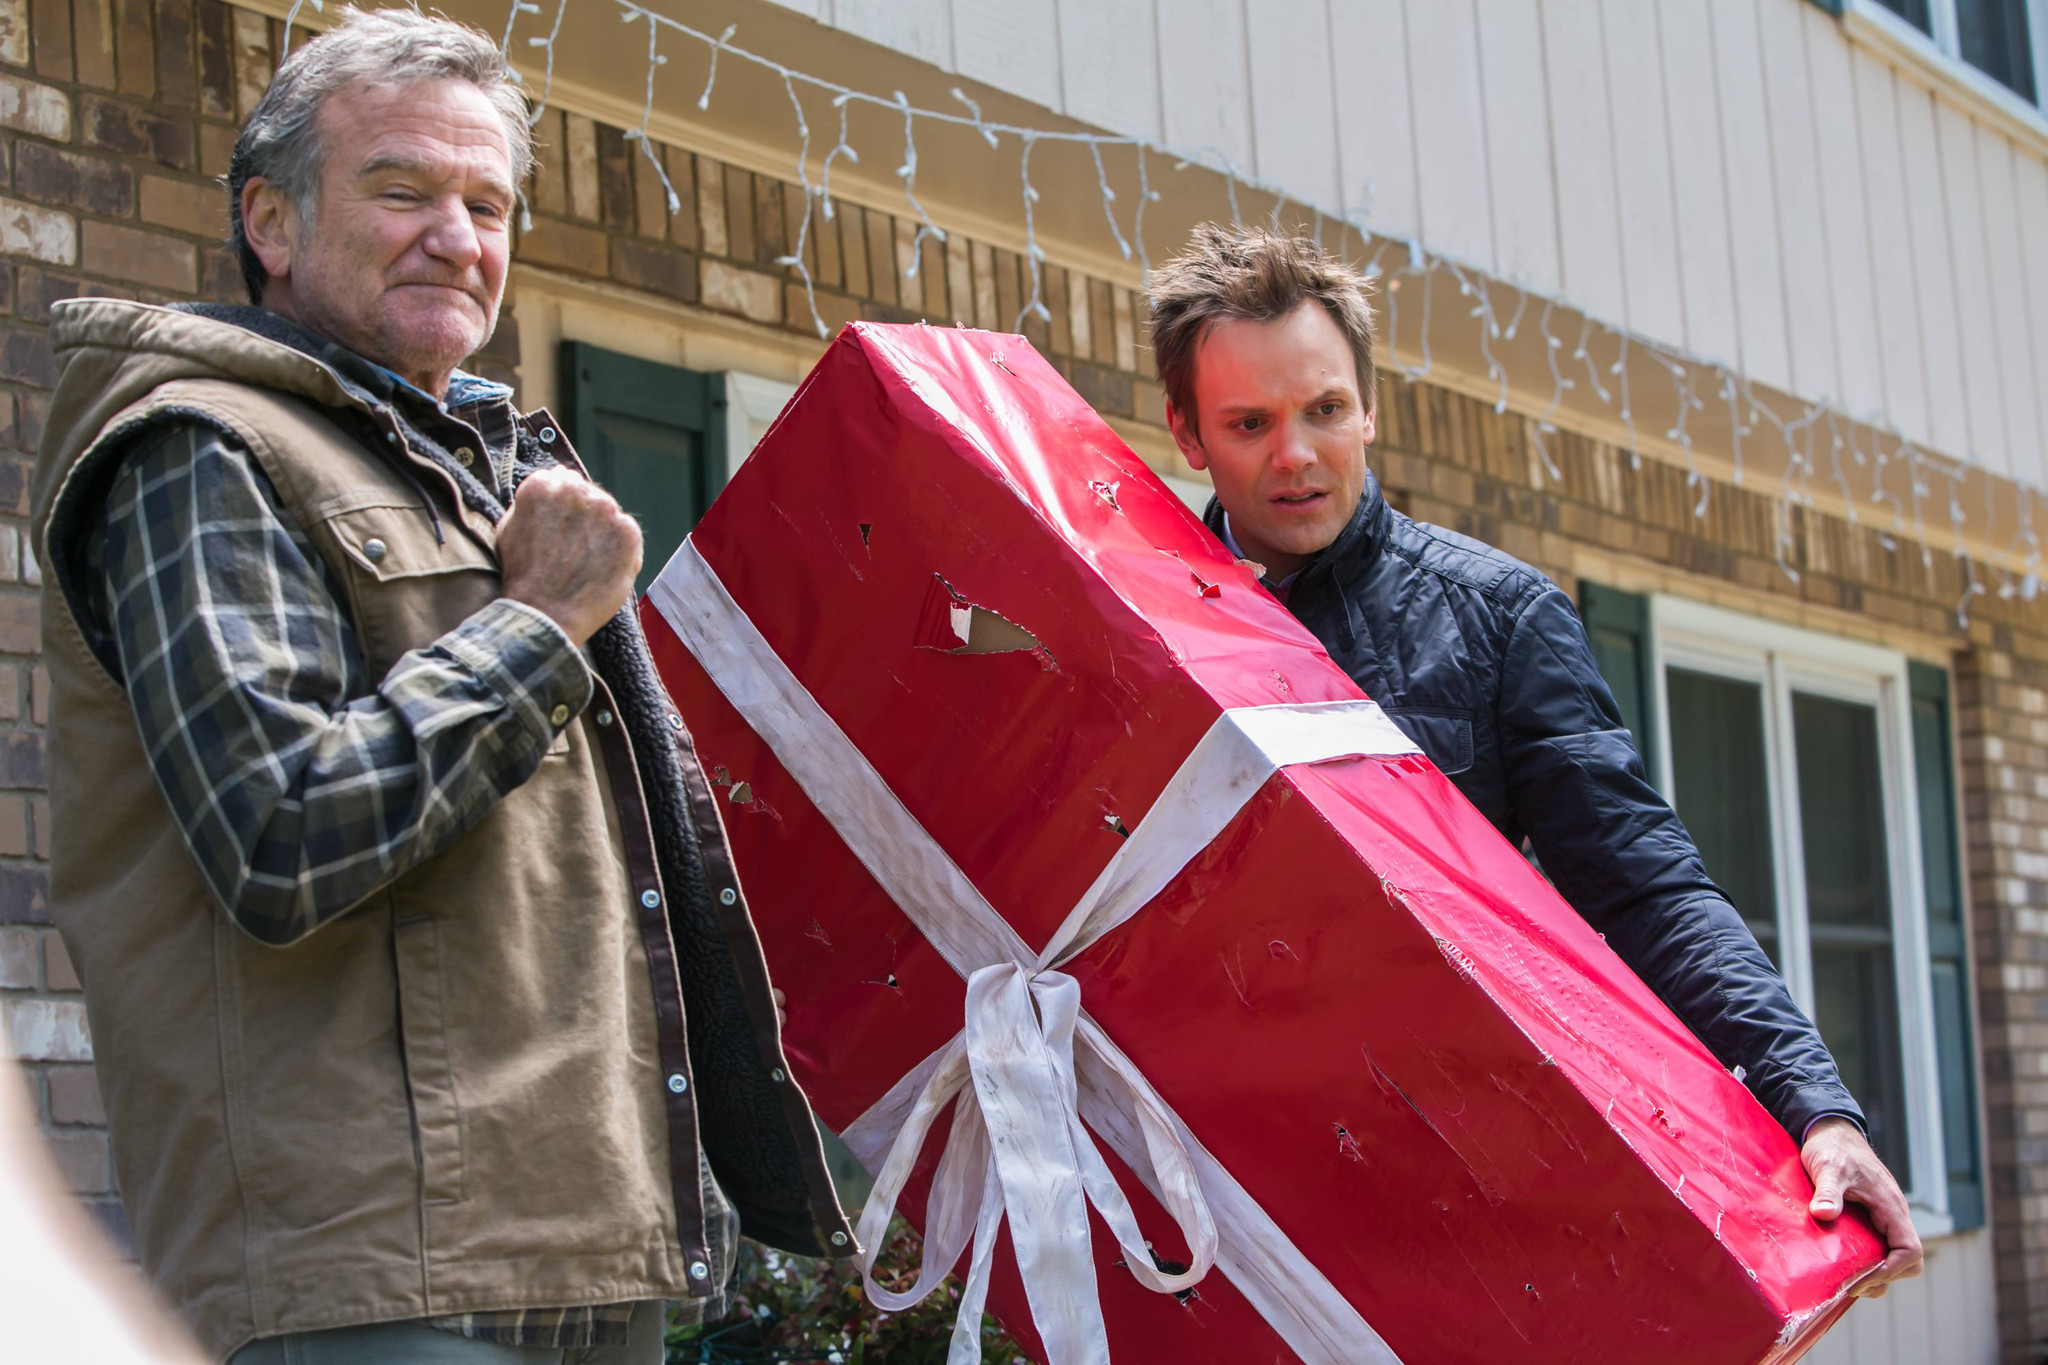 MOVIES 'A Merry Friggin' Christmas' includes Robin Williams shtick